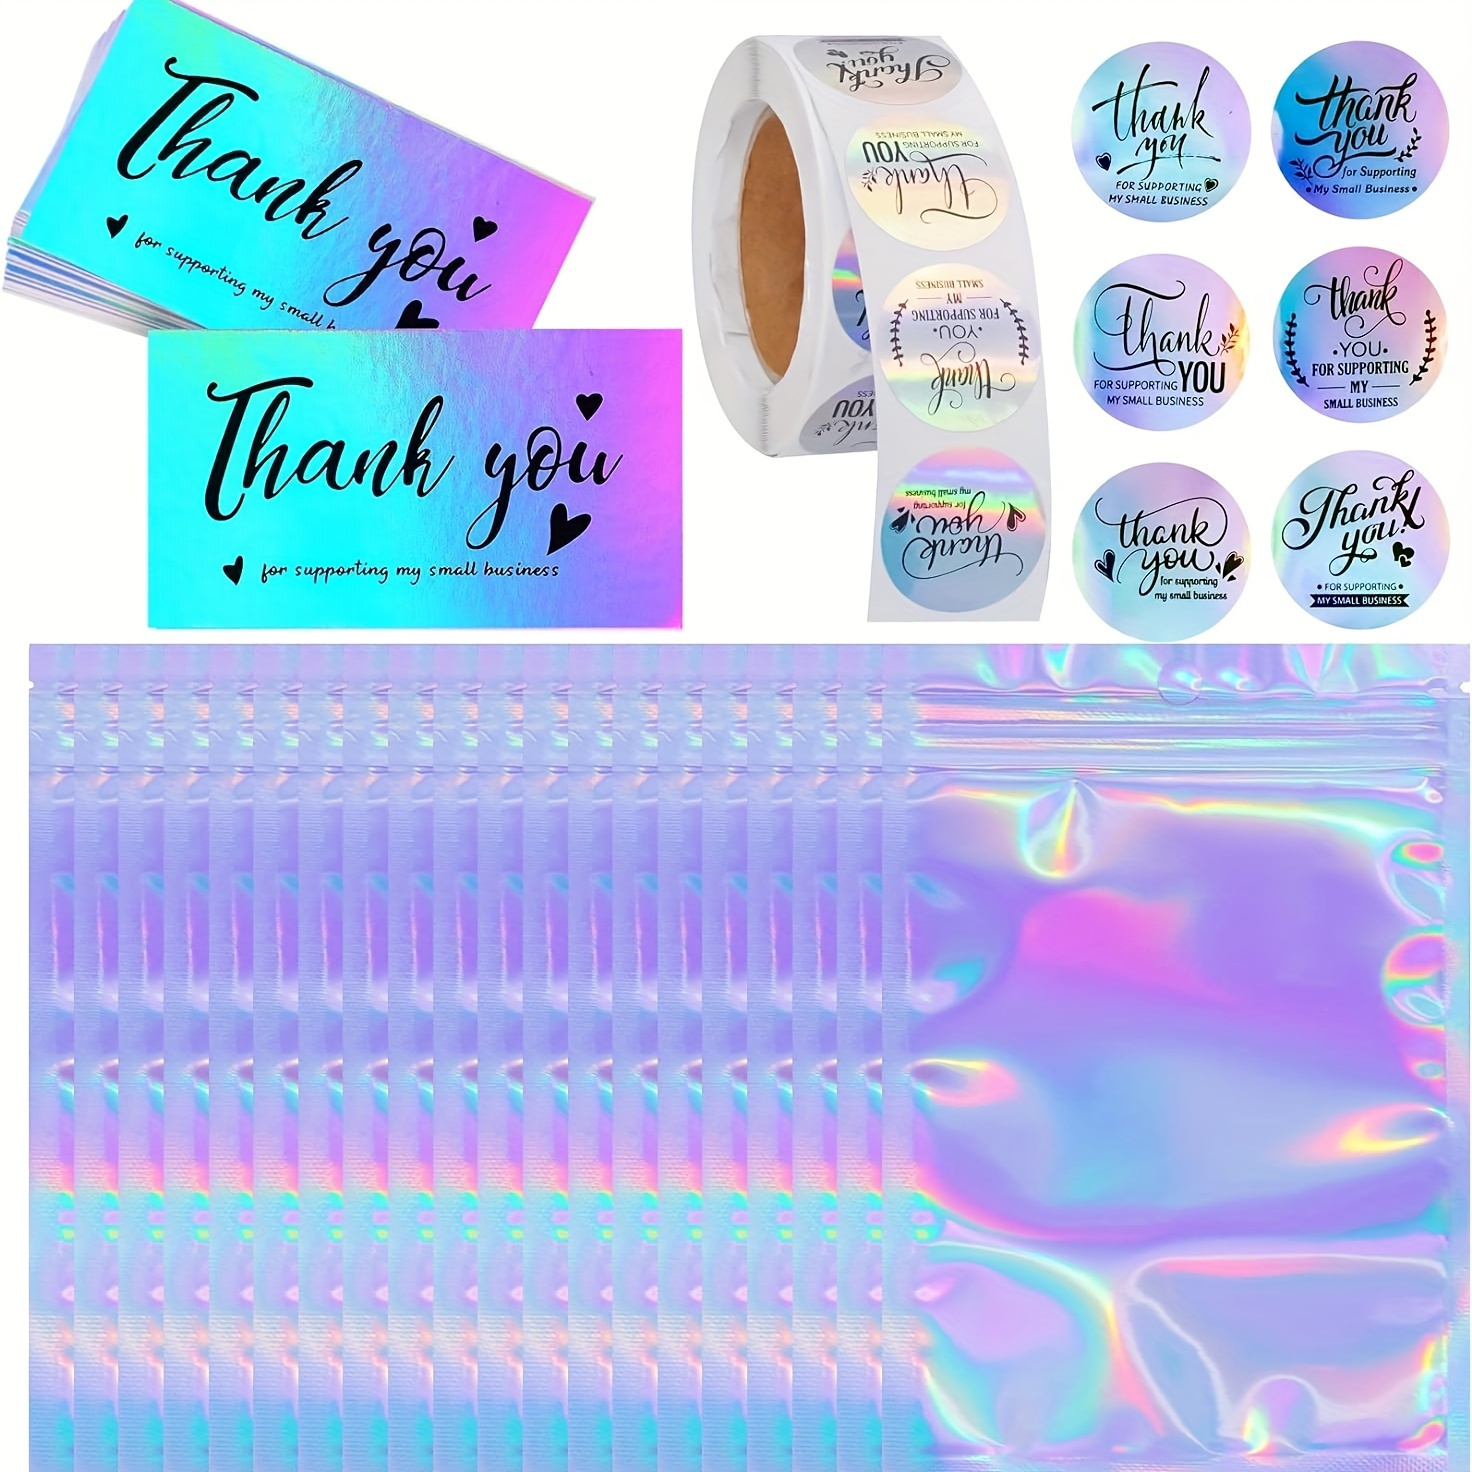 

Thank You Card And Sticker Set - 570 Pcs, 50 Thank You Greeting Cards With 20 Packaging Bags And 500 Stickers For Any Occasion - Perfect For Small Business Appreciation